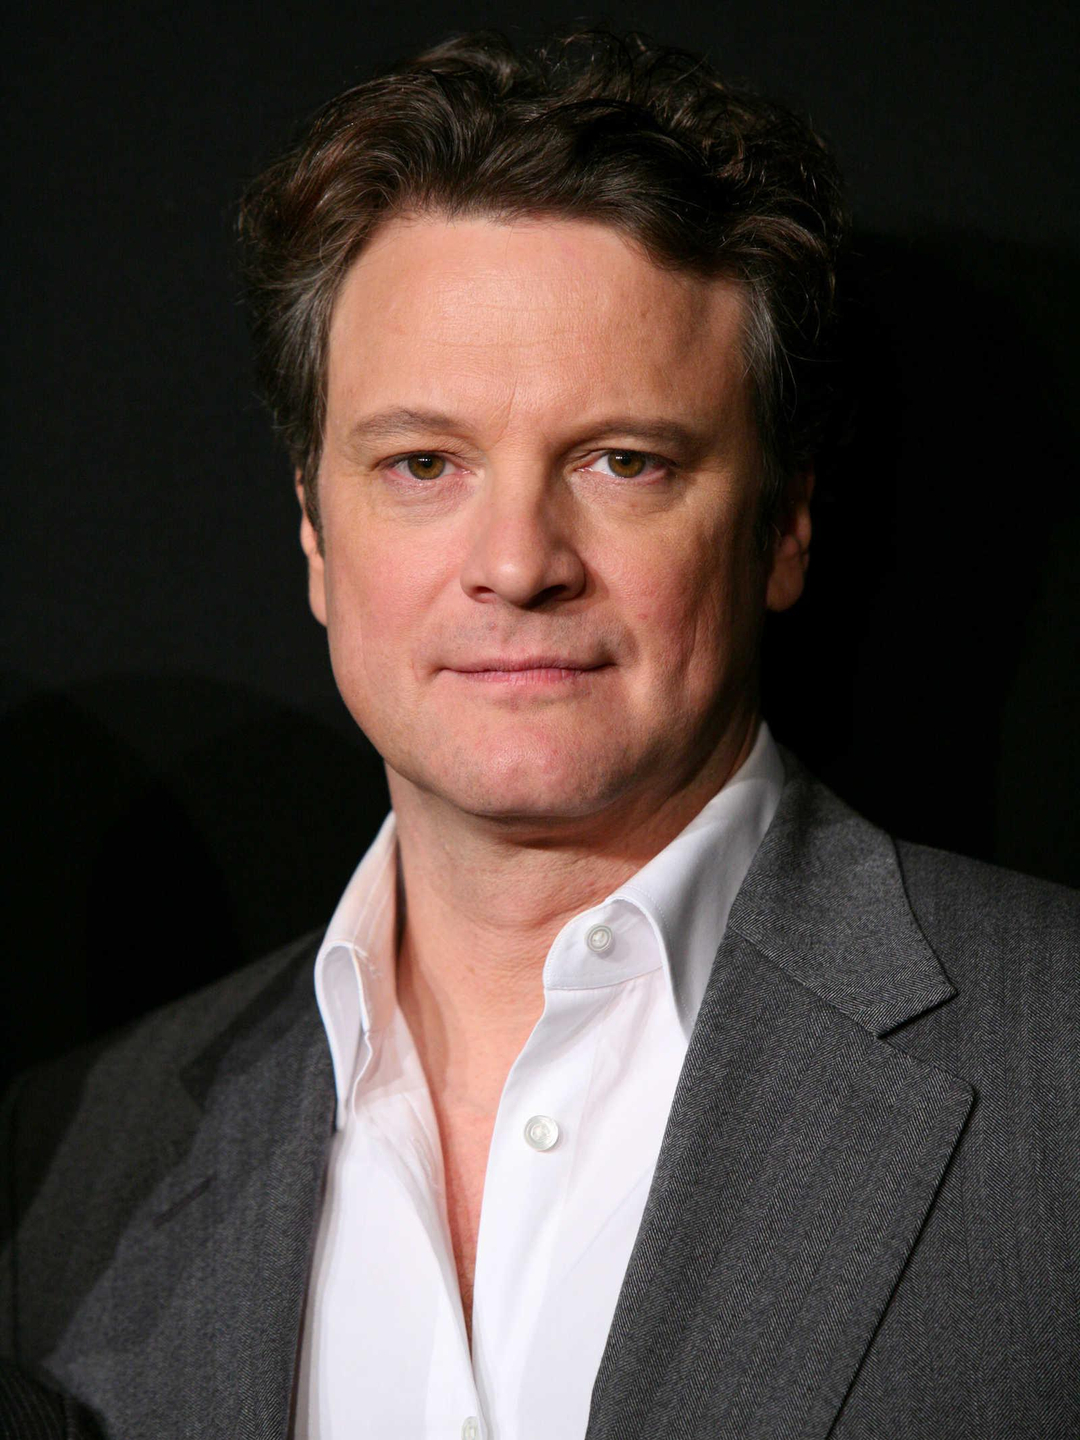 Colin Firth early life